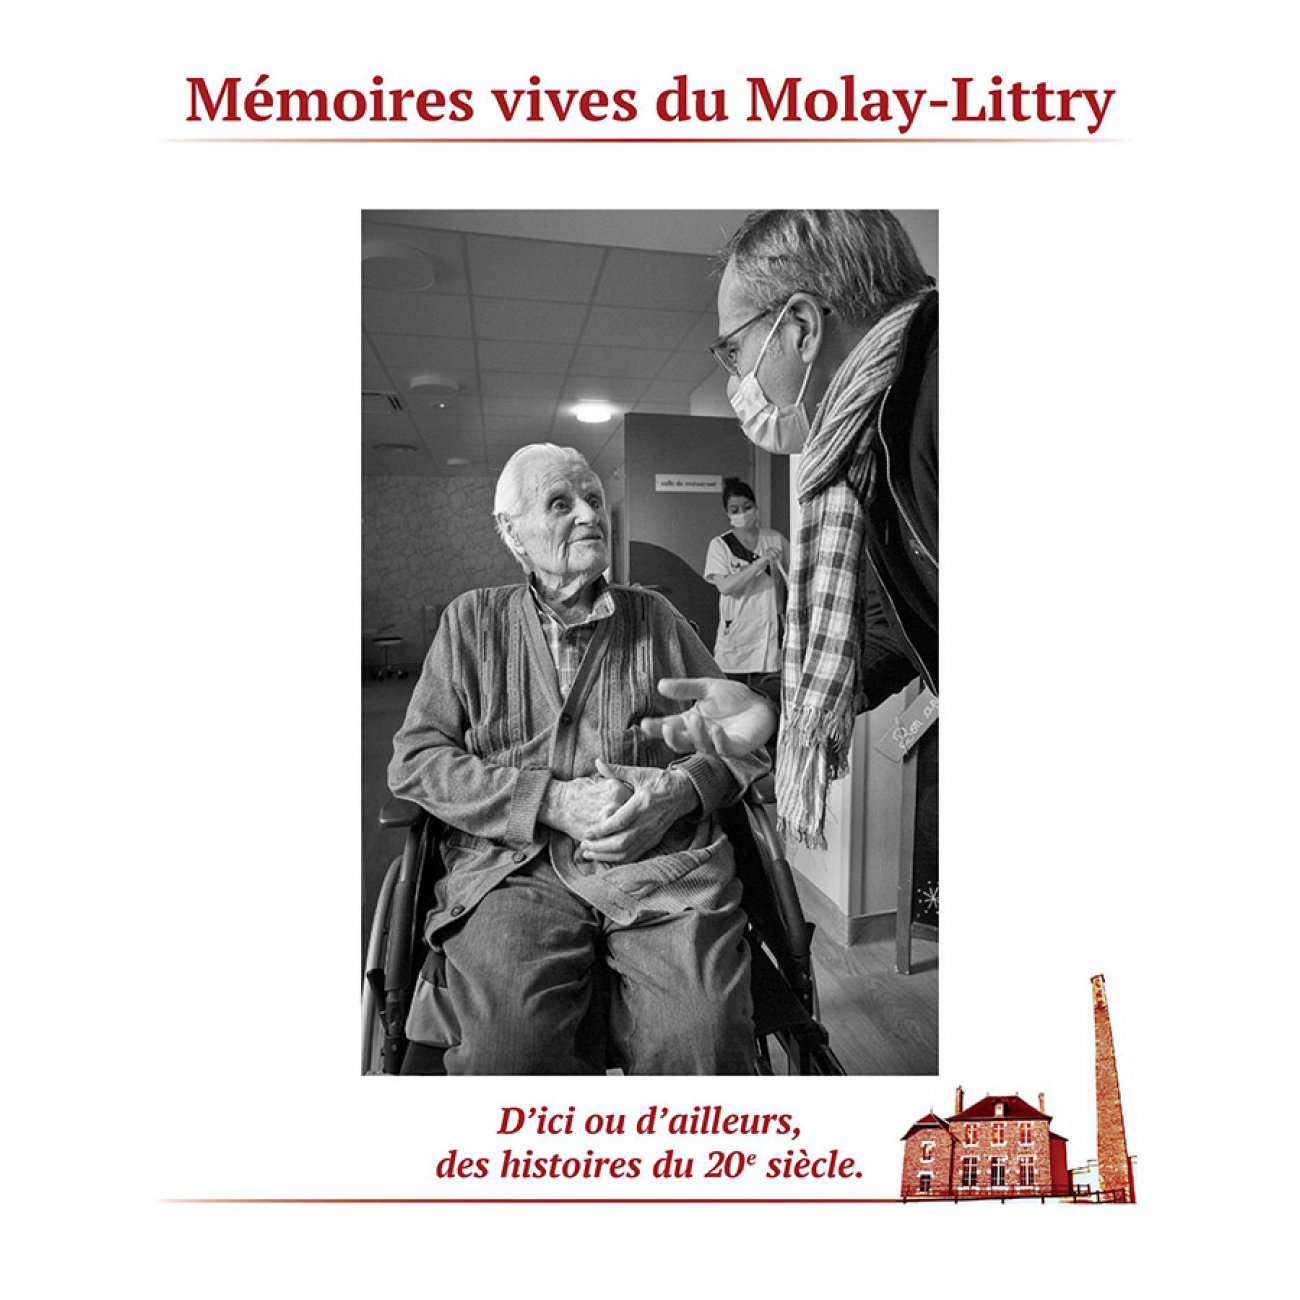 Expo Molay-Littry-01 - Titre.jpg